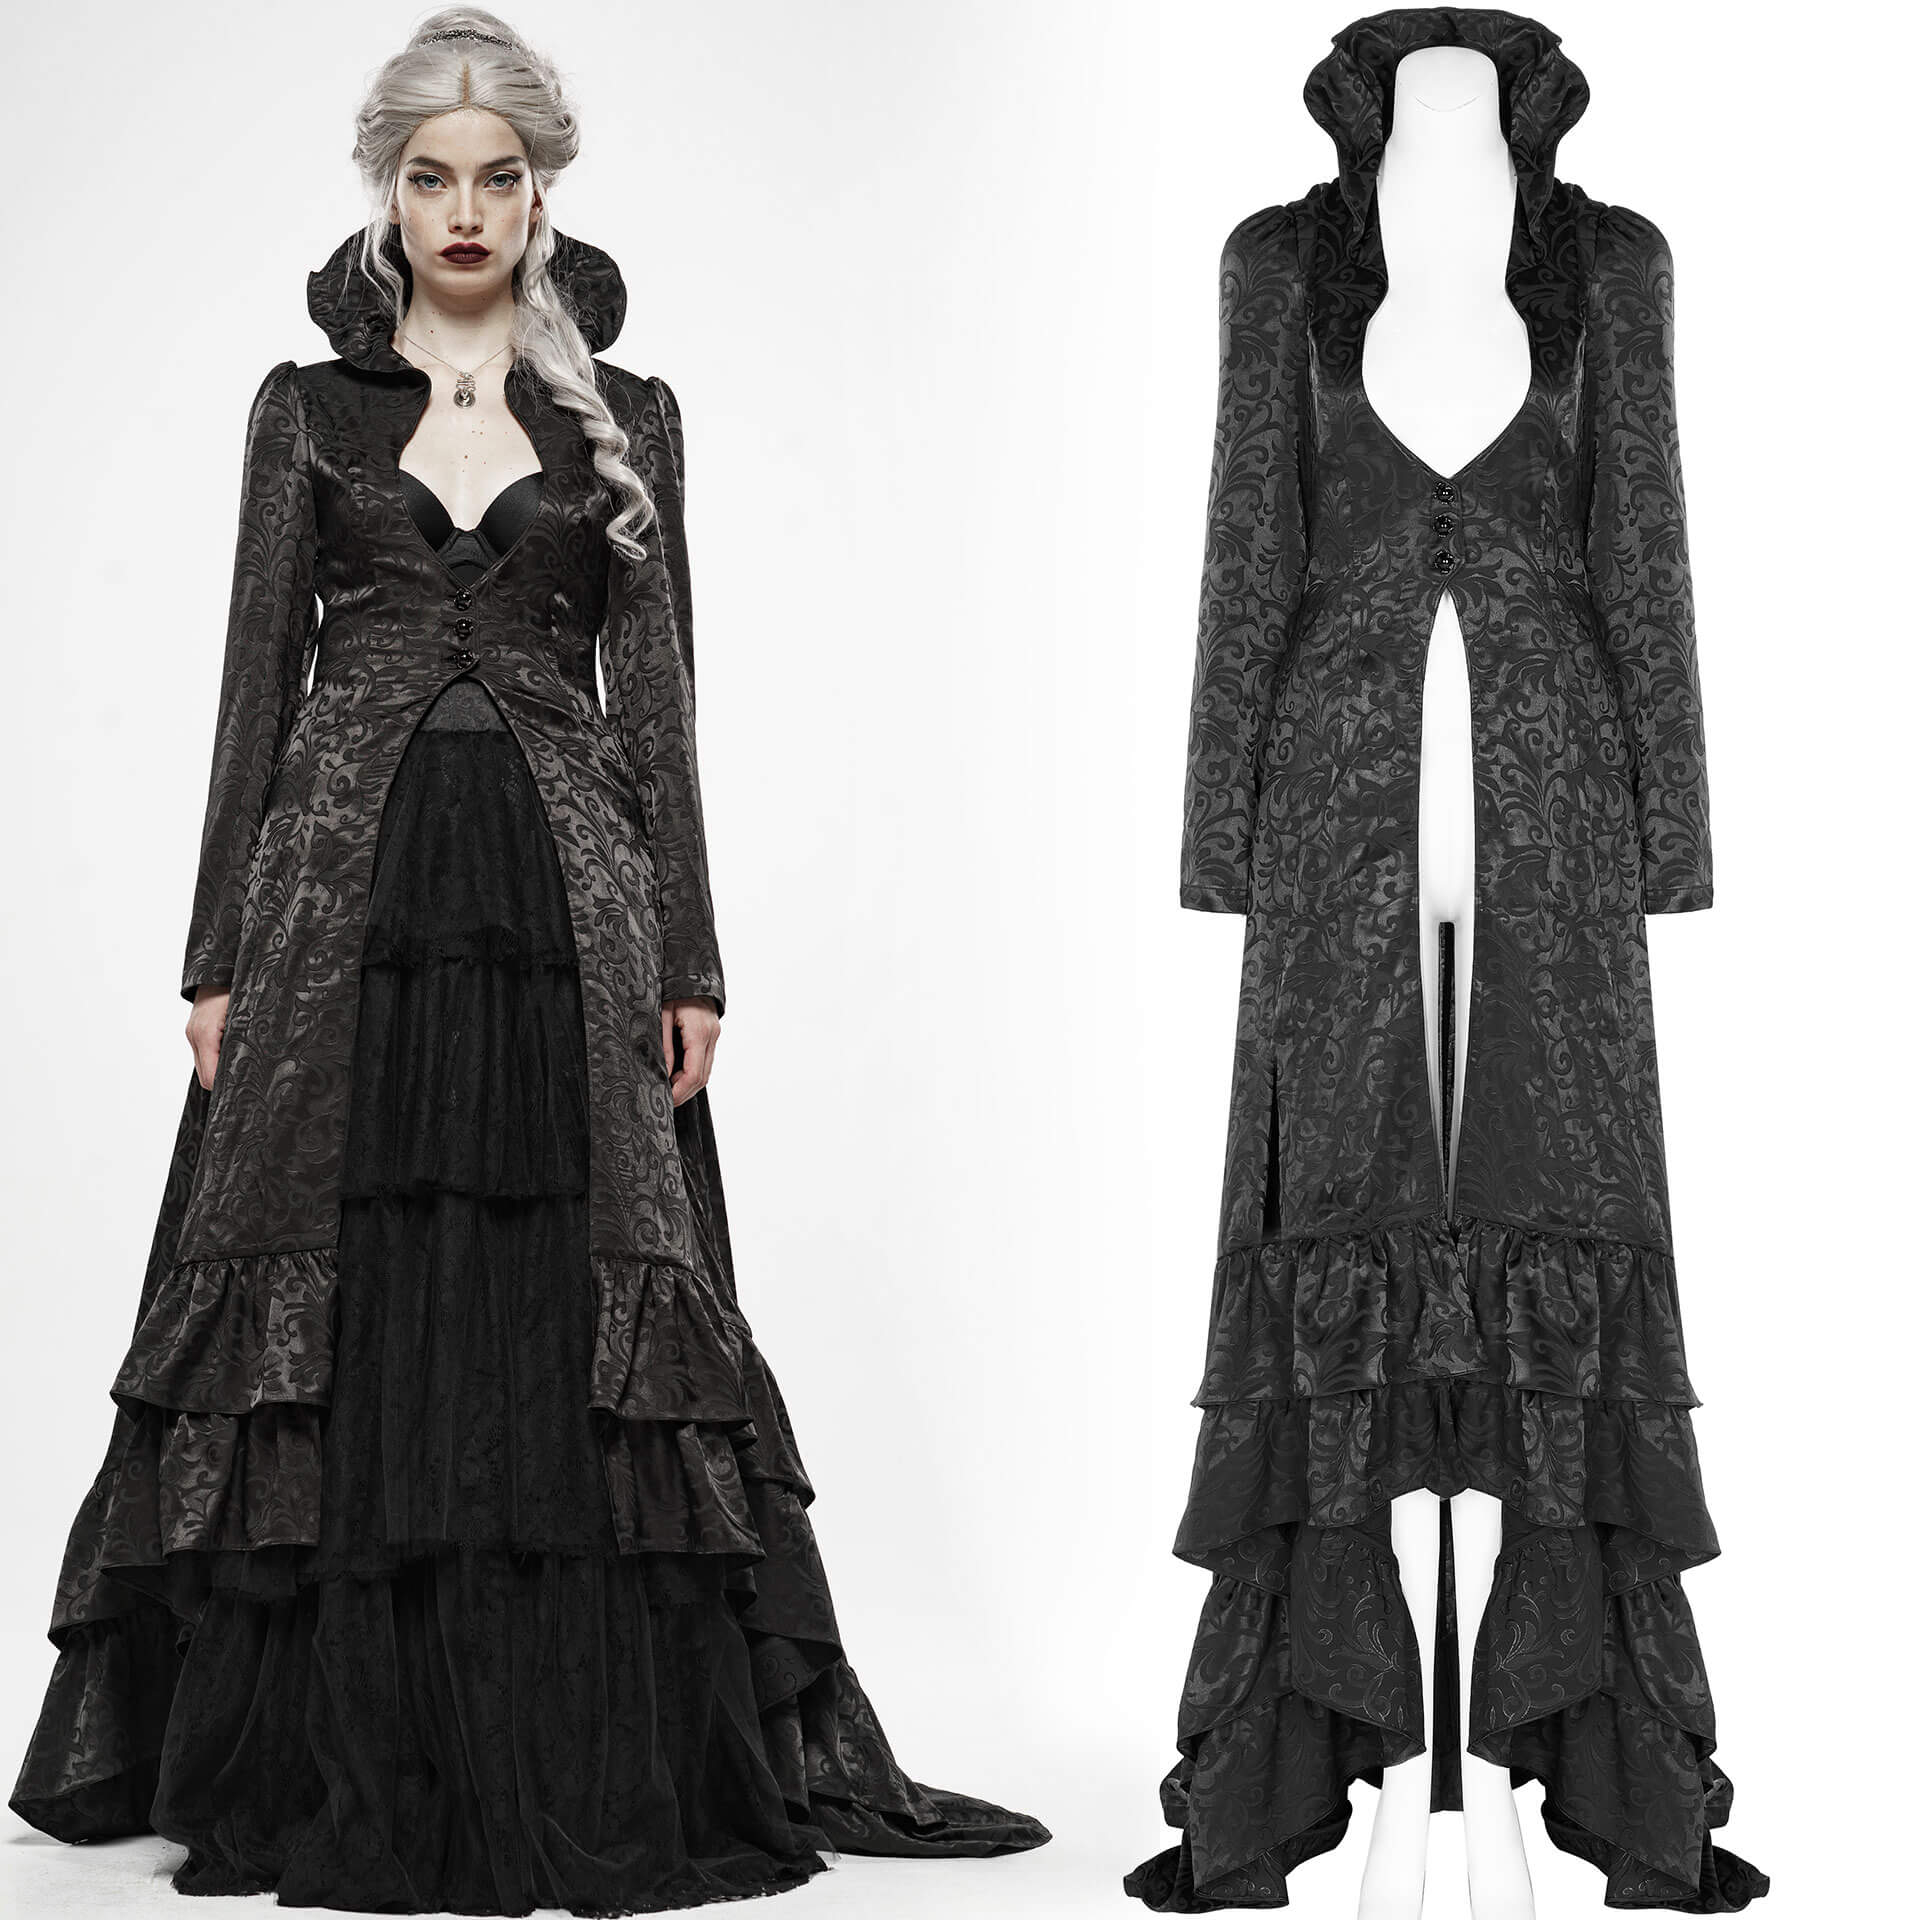 Obsidian Queen Coat WY-1137/BK by PUNK RAVE brand